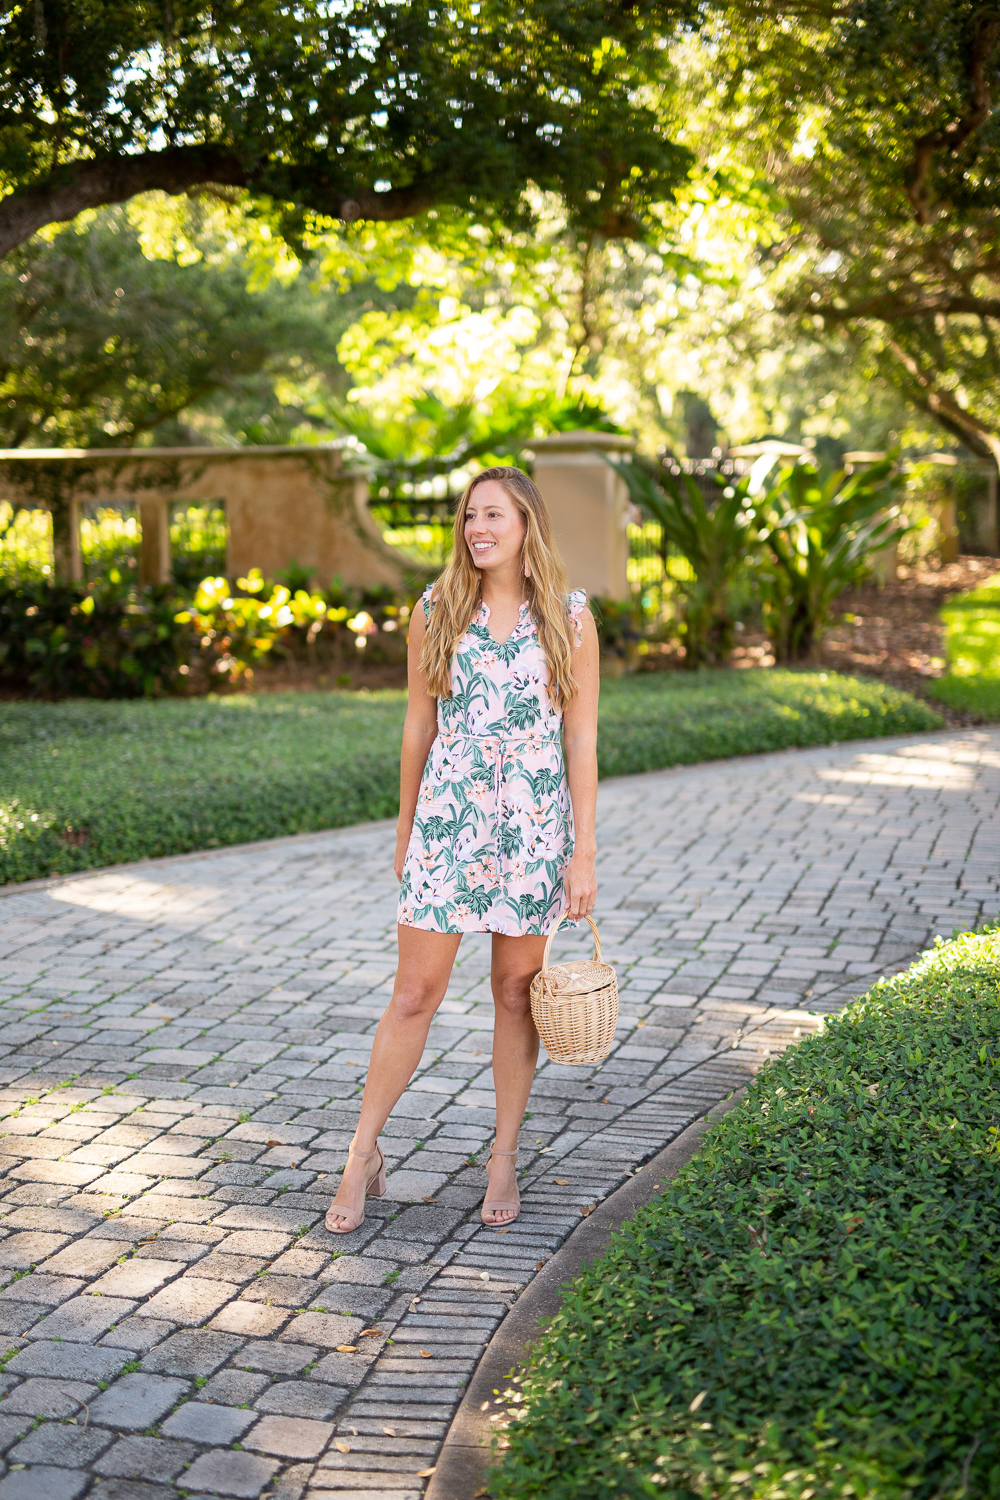 Floral Dresses to Wear to a Wedding | Sunshine Style